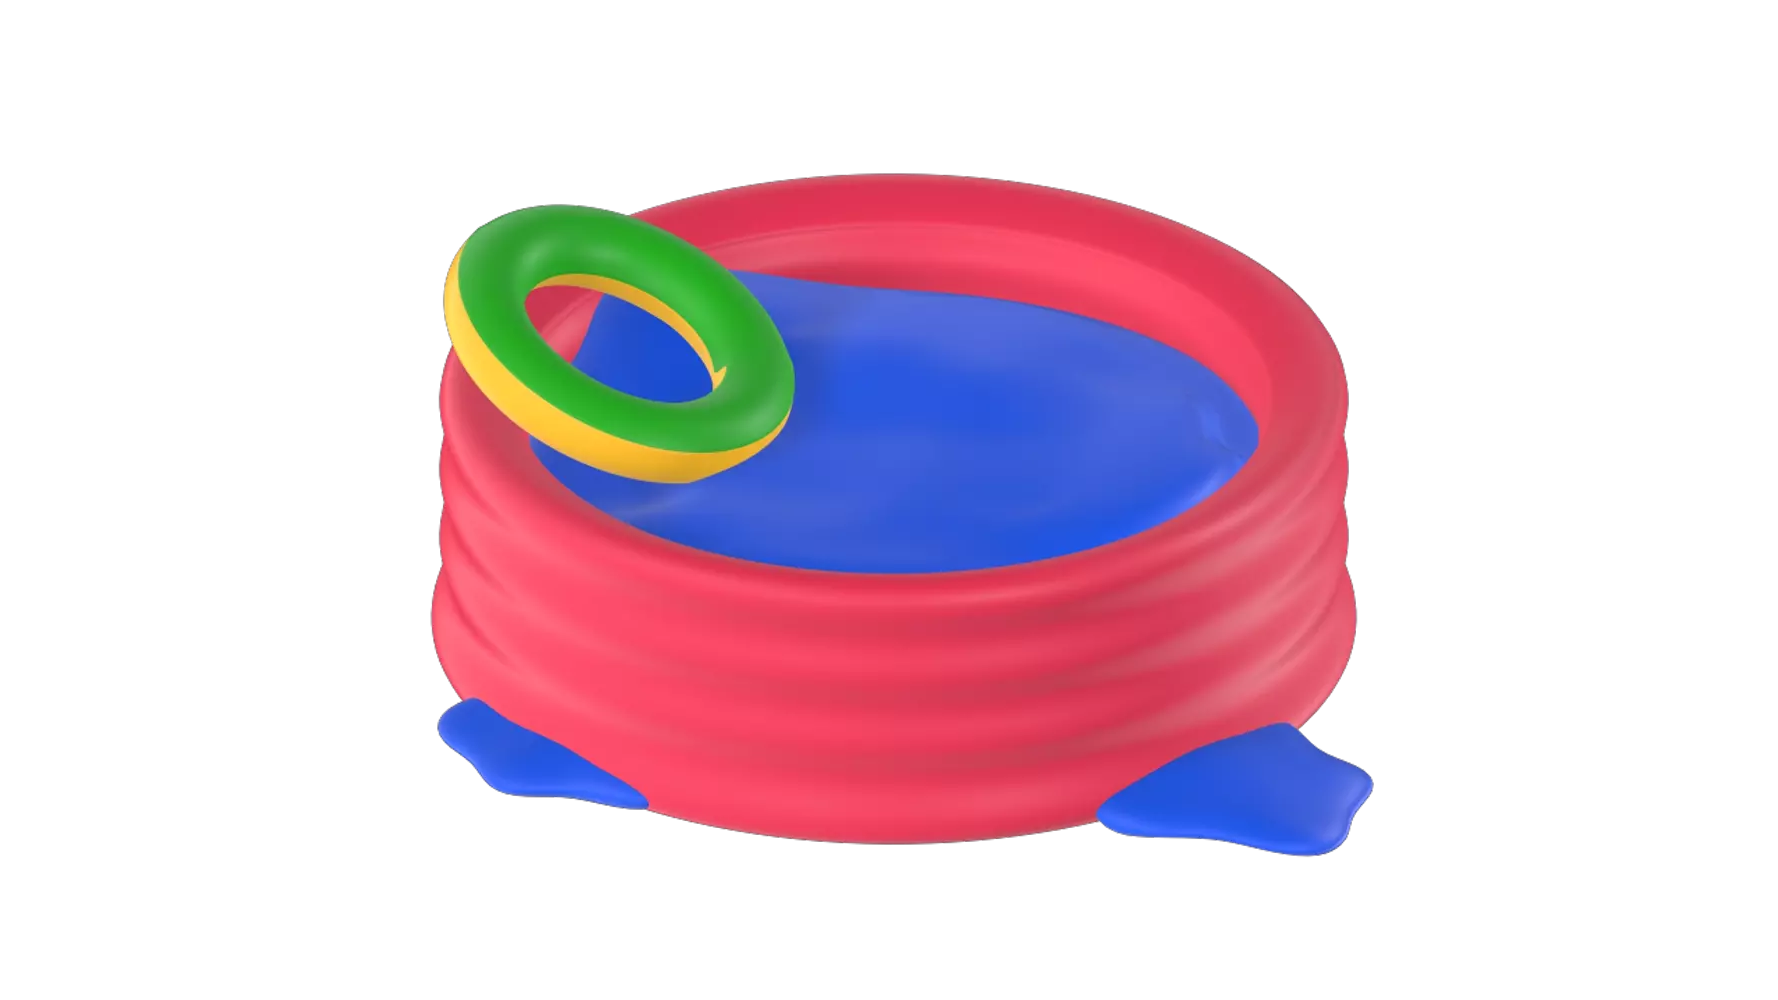 Swimming Pool 3D Graphic